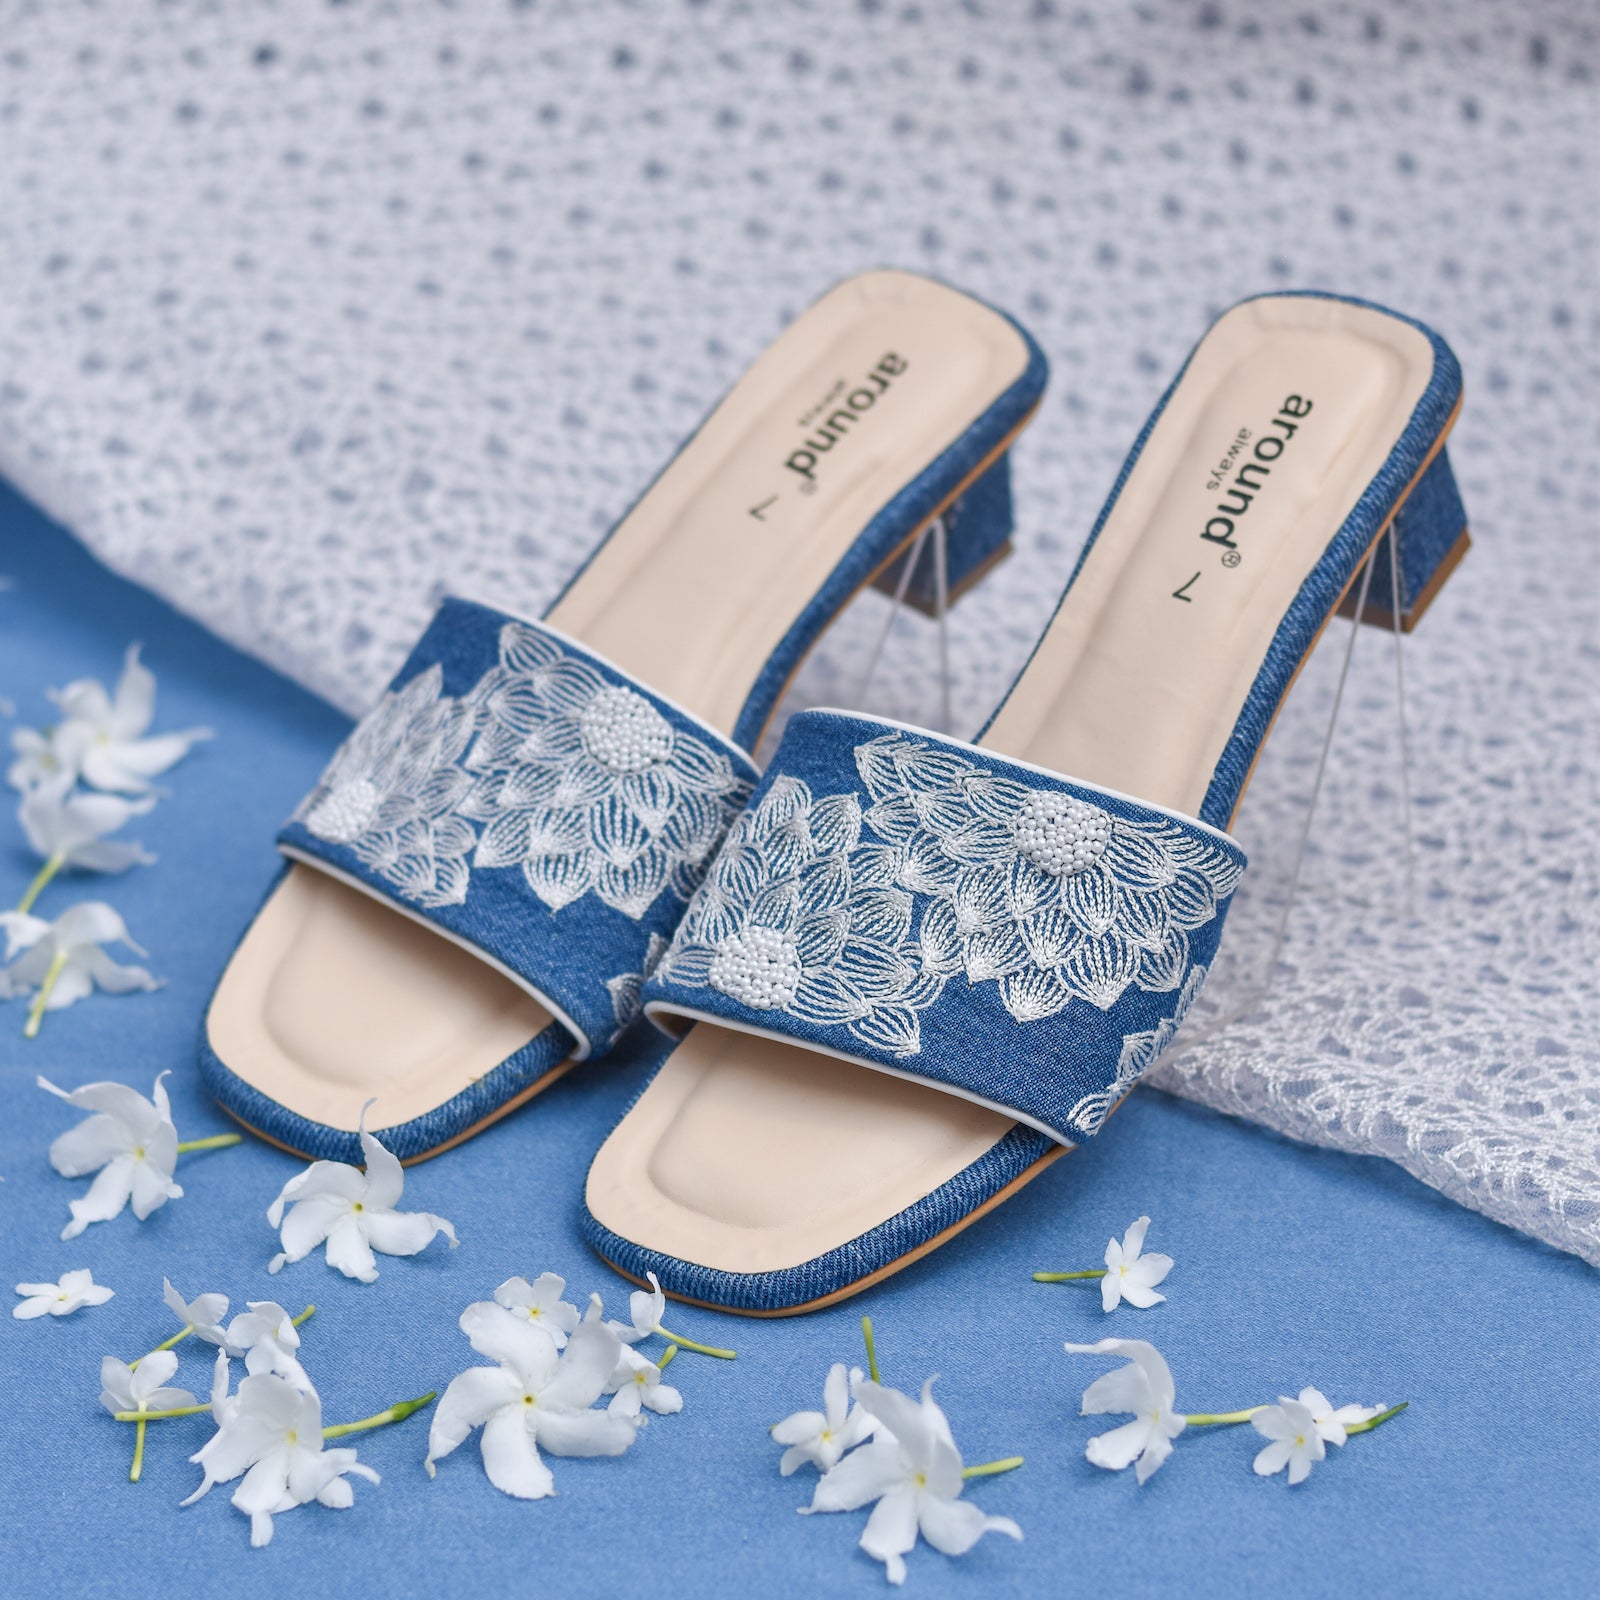 Blue Denim embroidered sandals heels from India